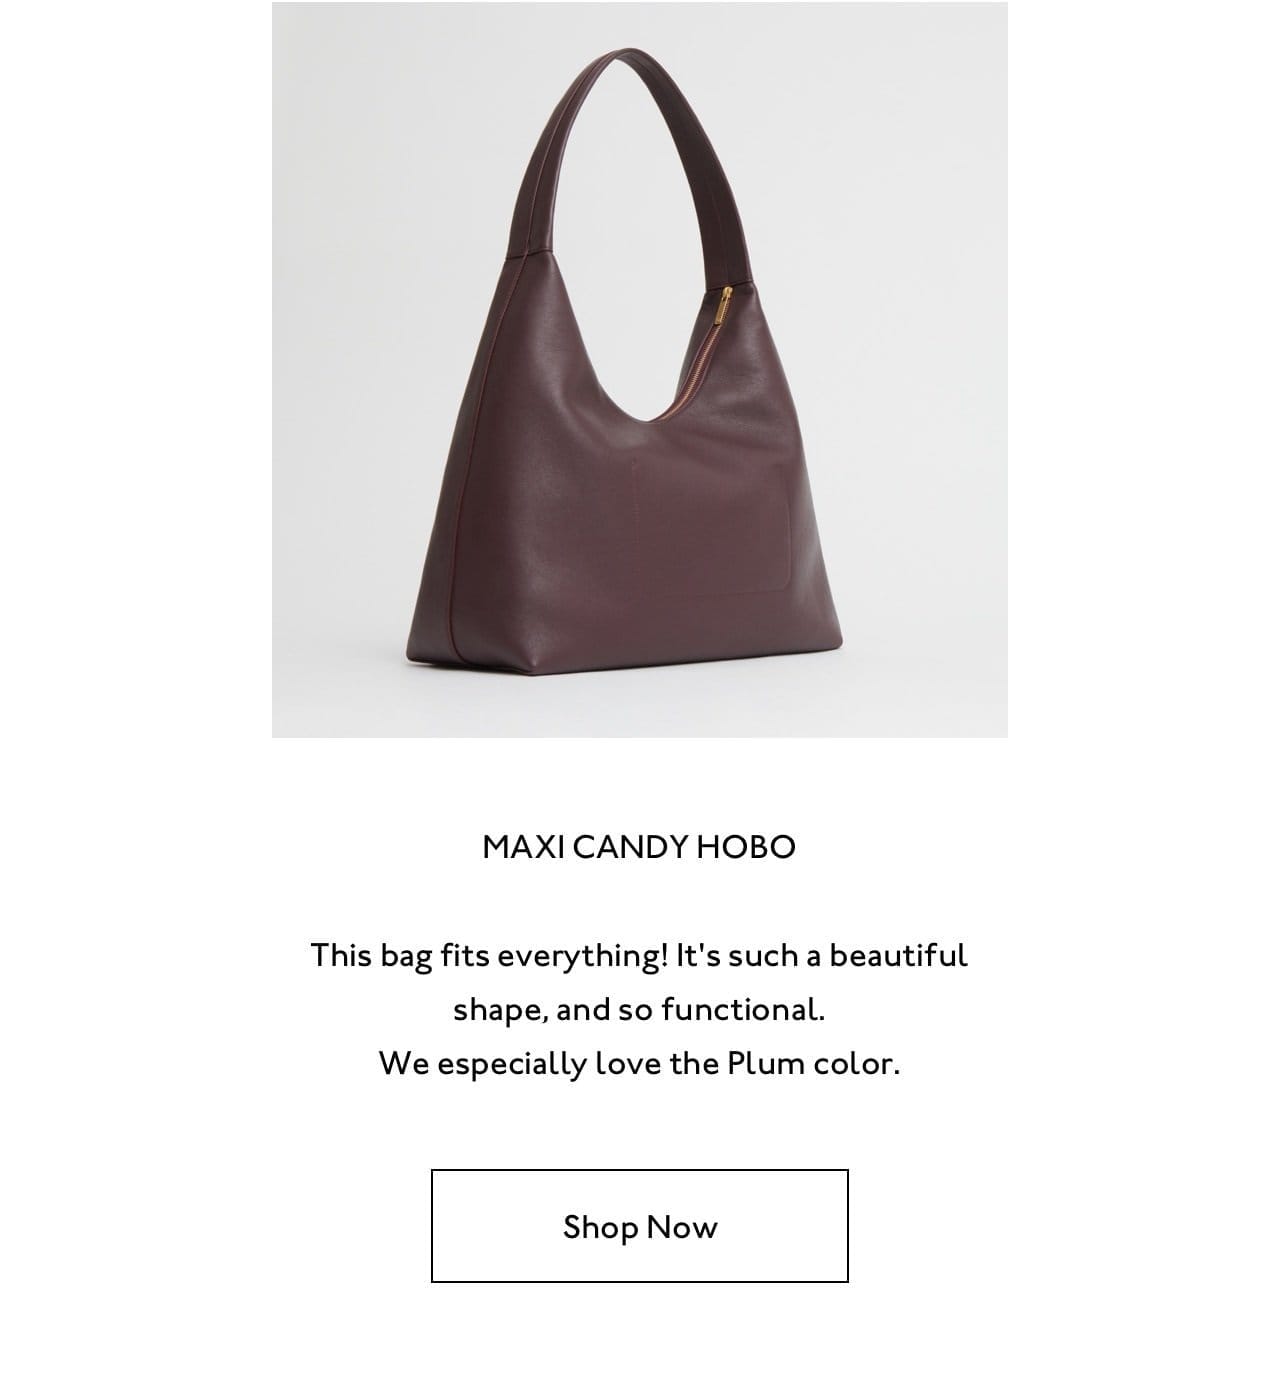 This bag fits everything! It's such a beautiful shape, and so functional. We especially love the plum color. Shop now.